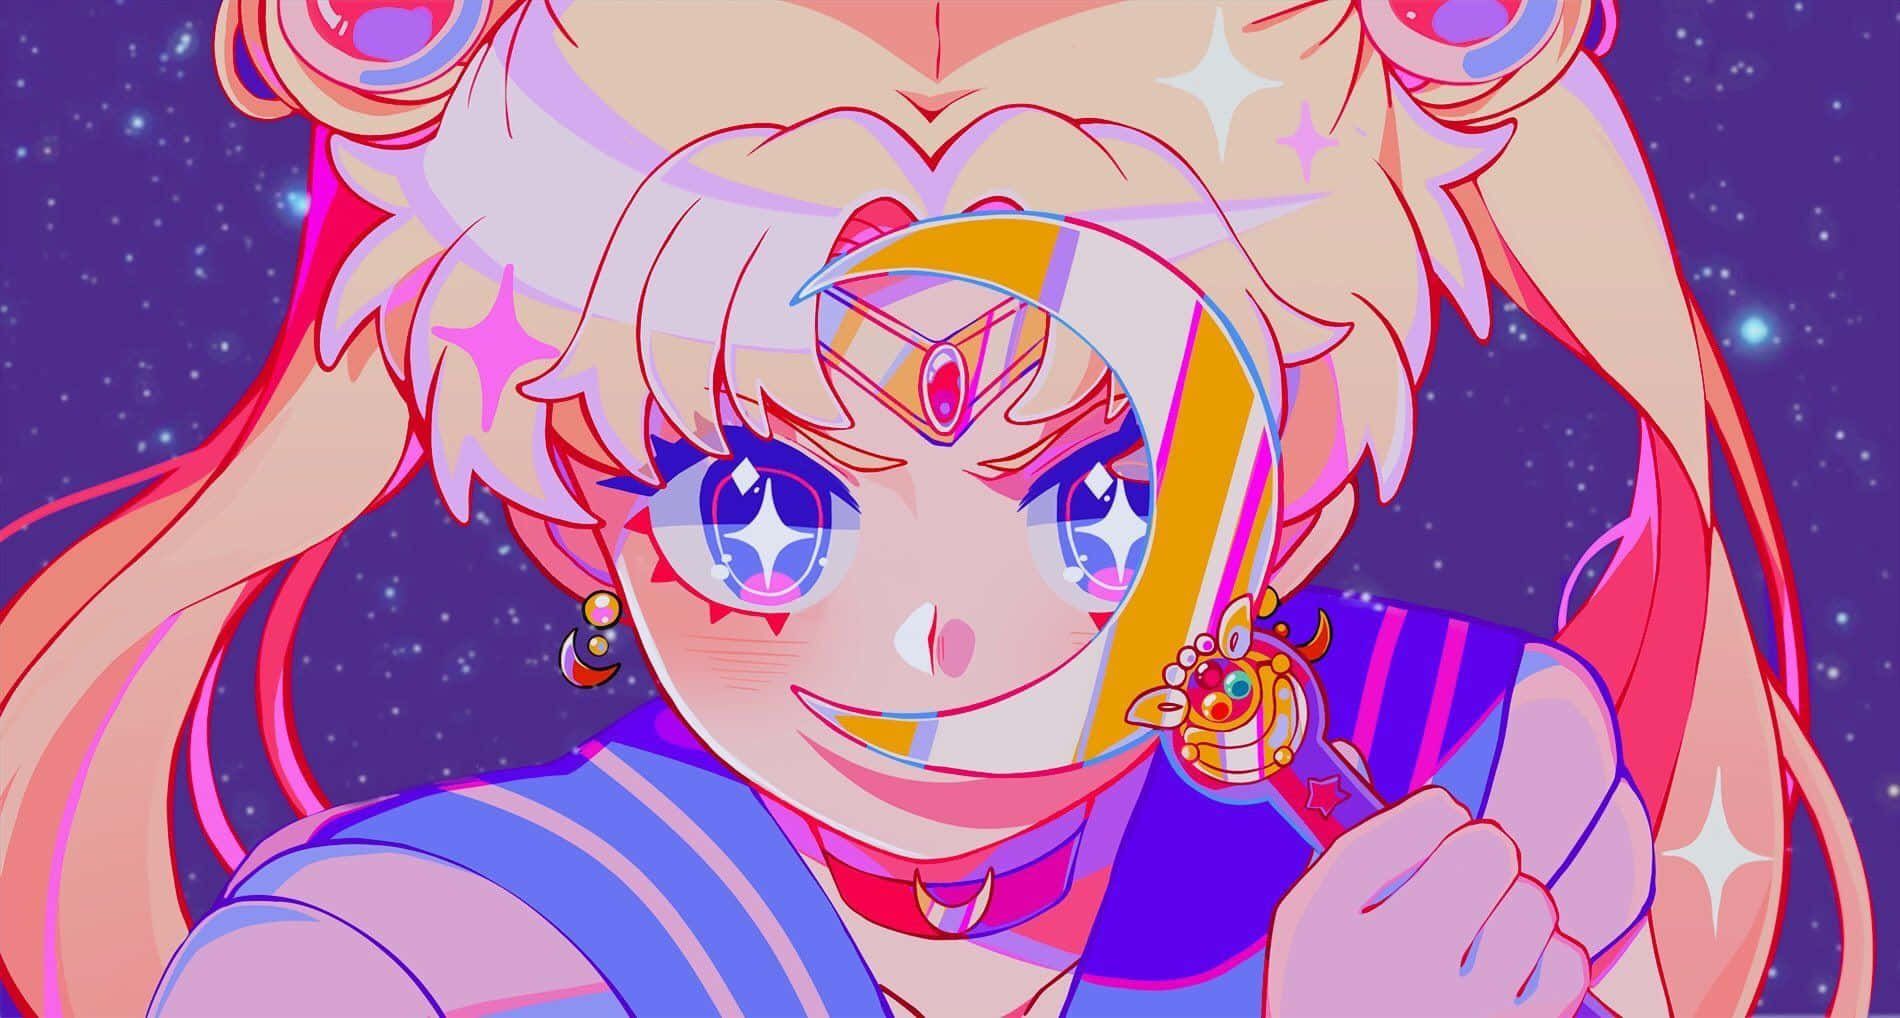 A close up of Sailor Moon, a character from the anime Sailor Moon, holding a magical brooch. - Sailor Moon